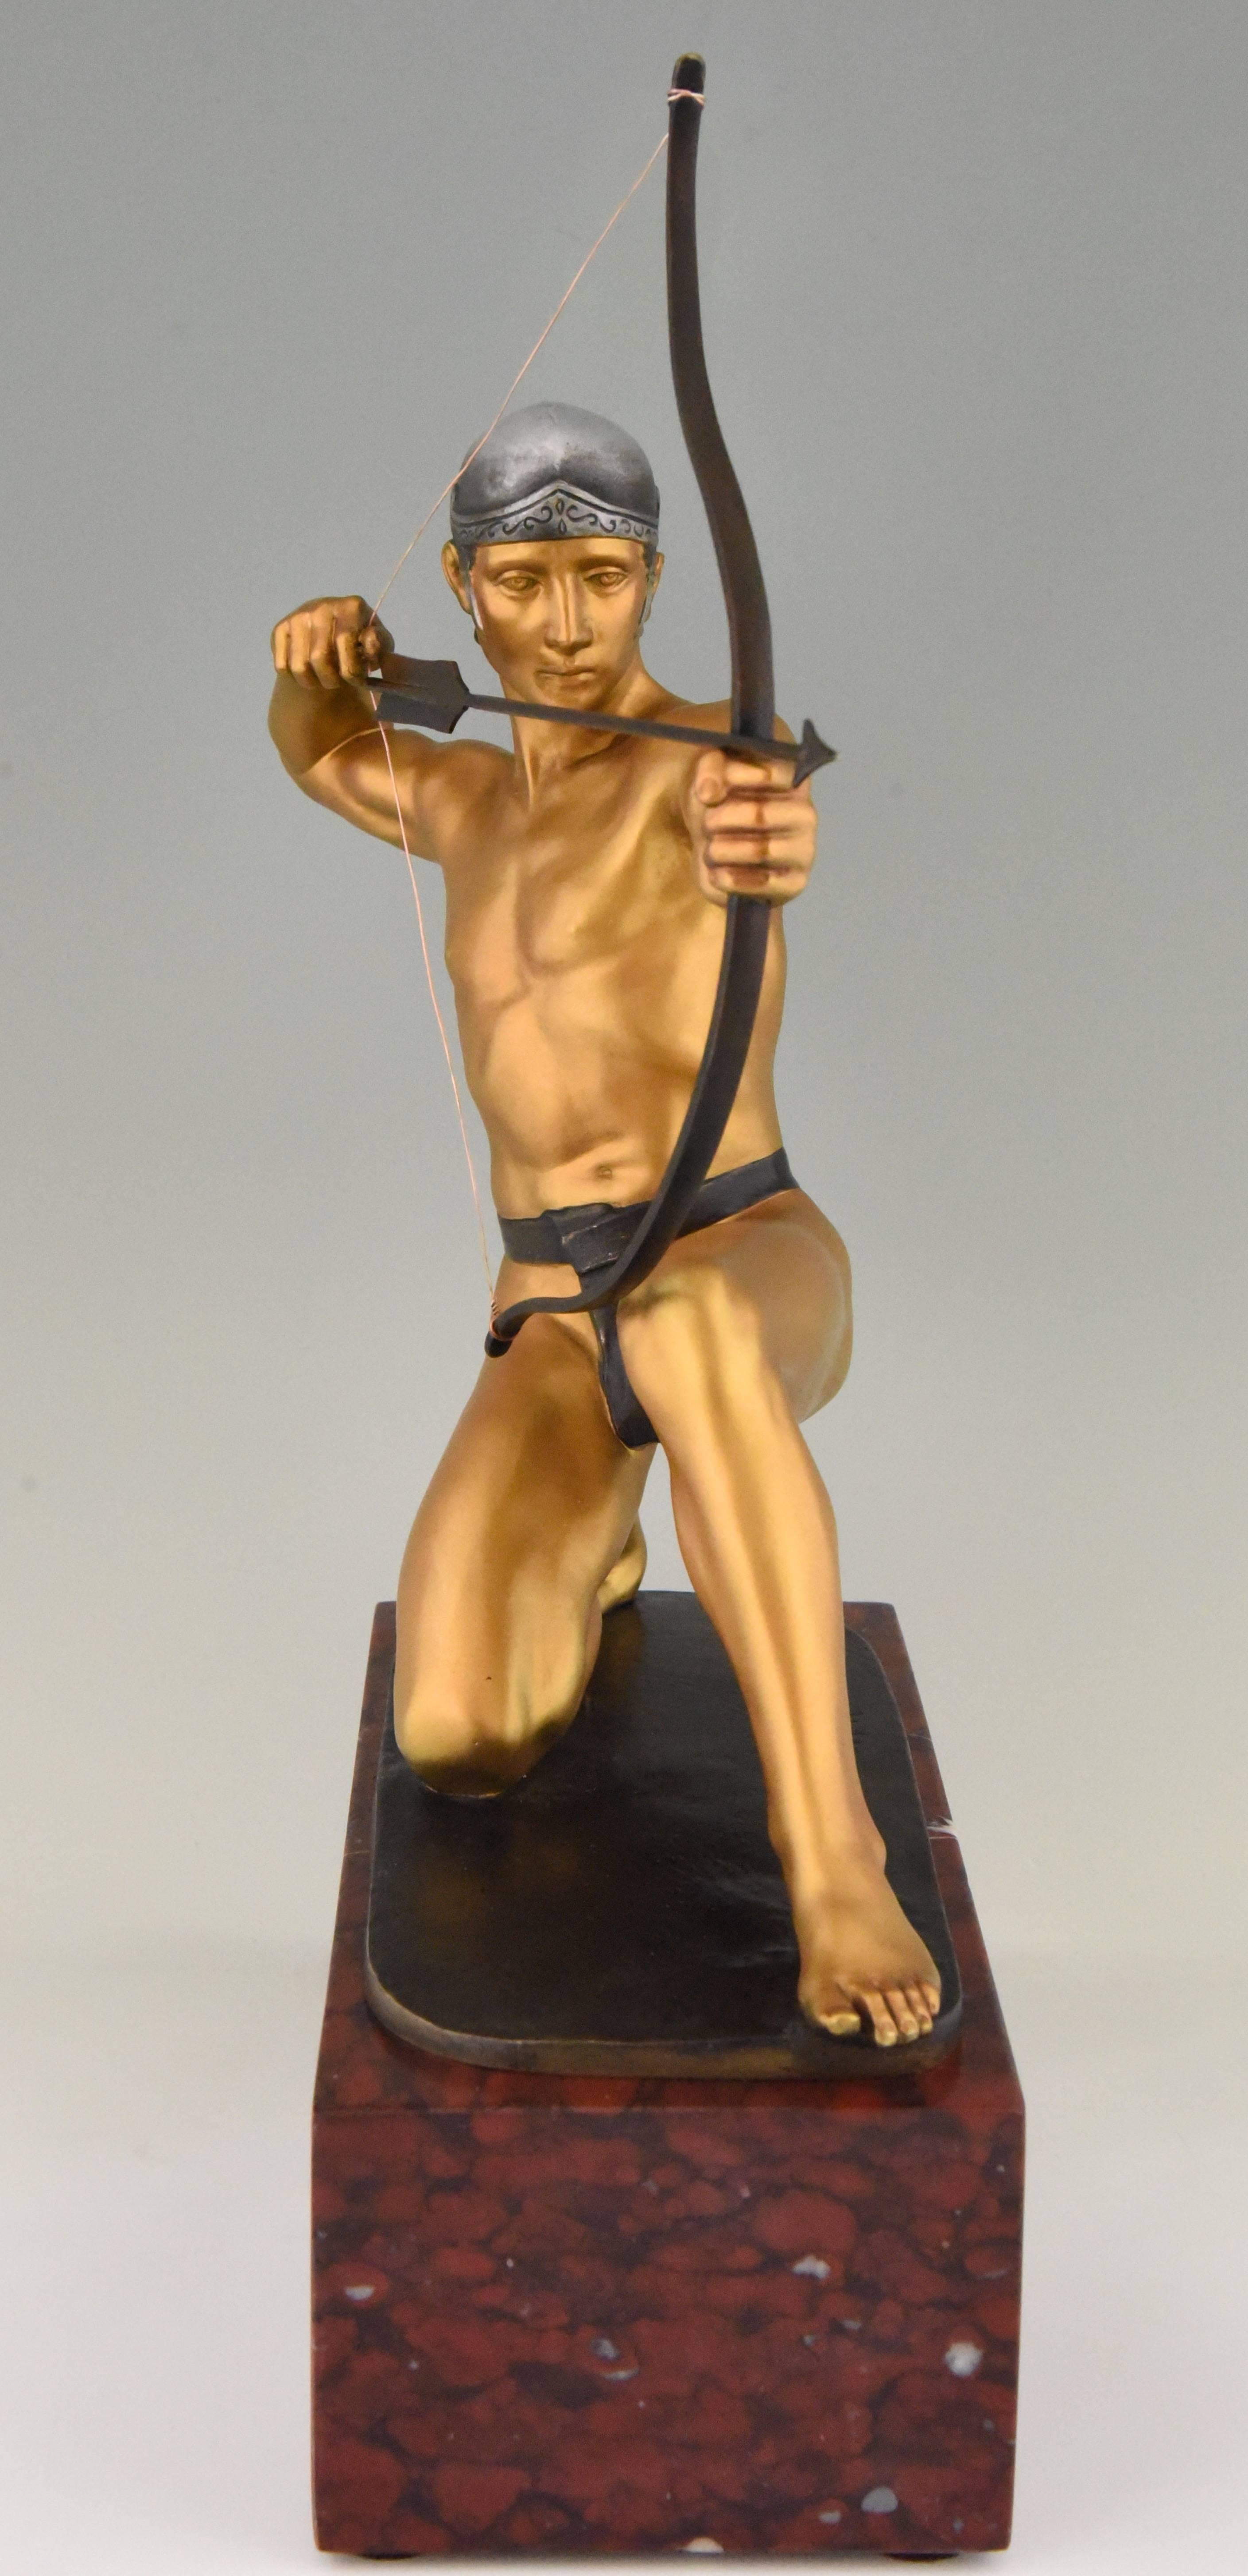 German Antique Bronze Sculpture of a Male Nude Archer by Rudolf Kaesbach  1900